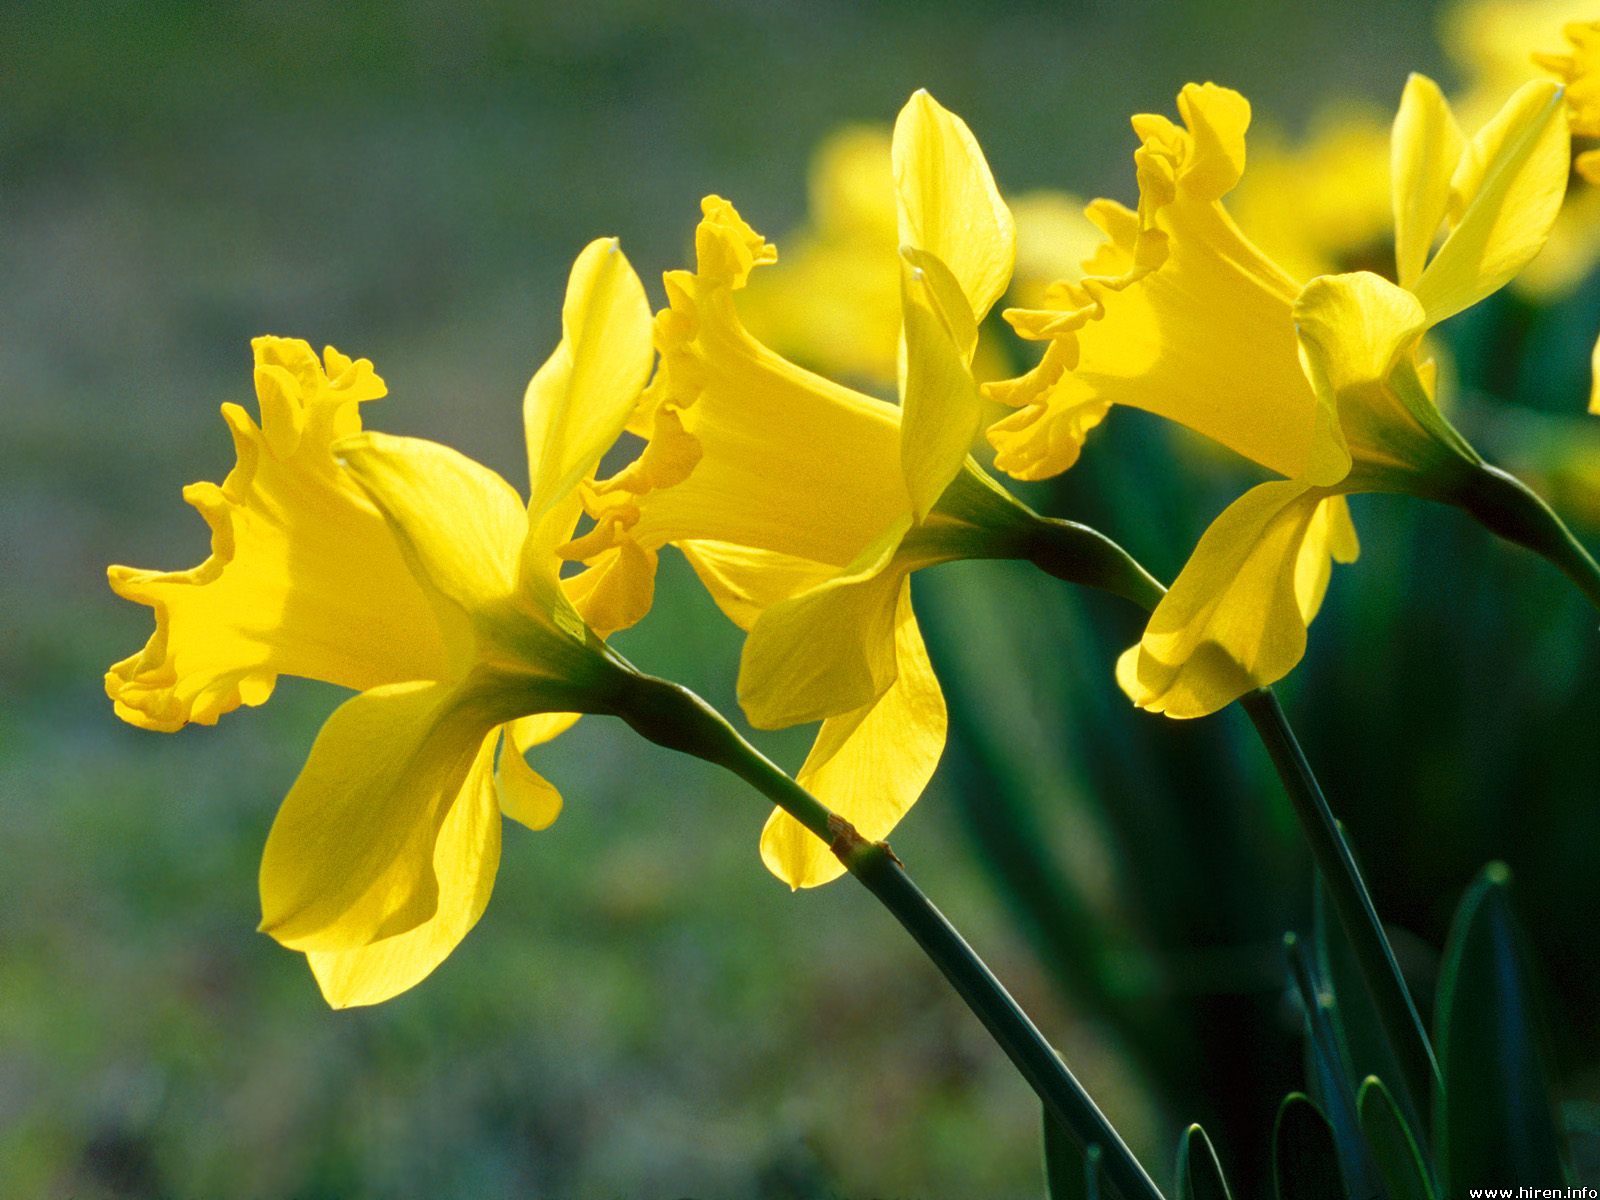 Amazingly perfect daffodils in nature, 2011 free download wallpapers